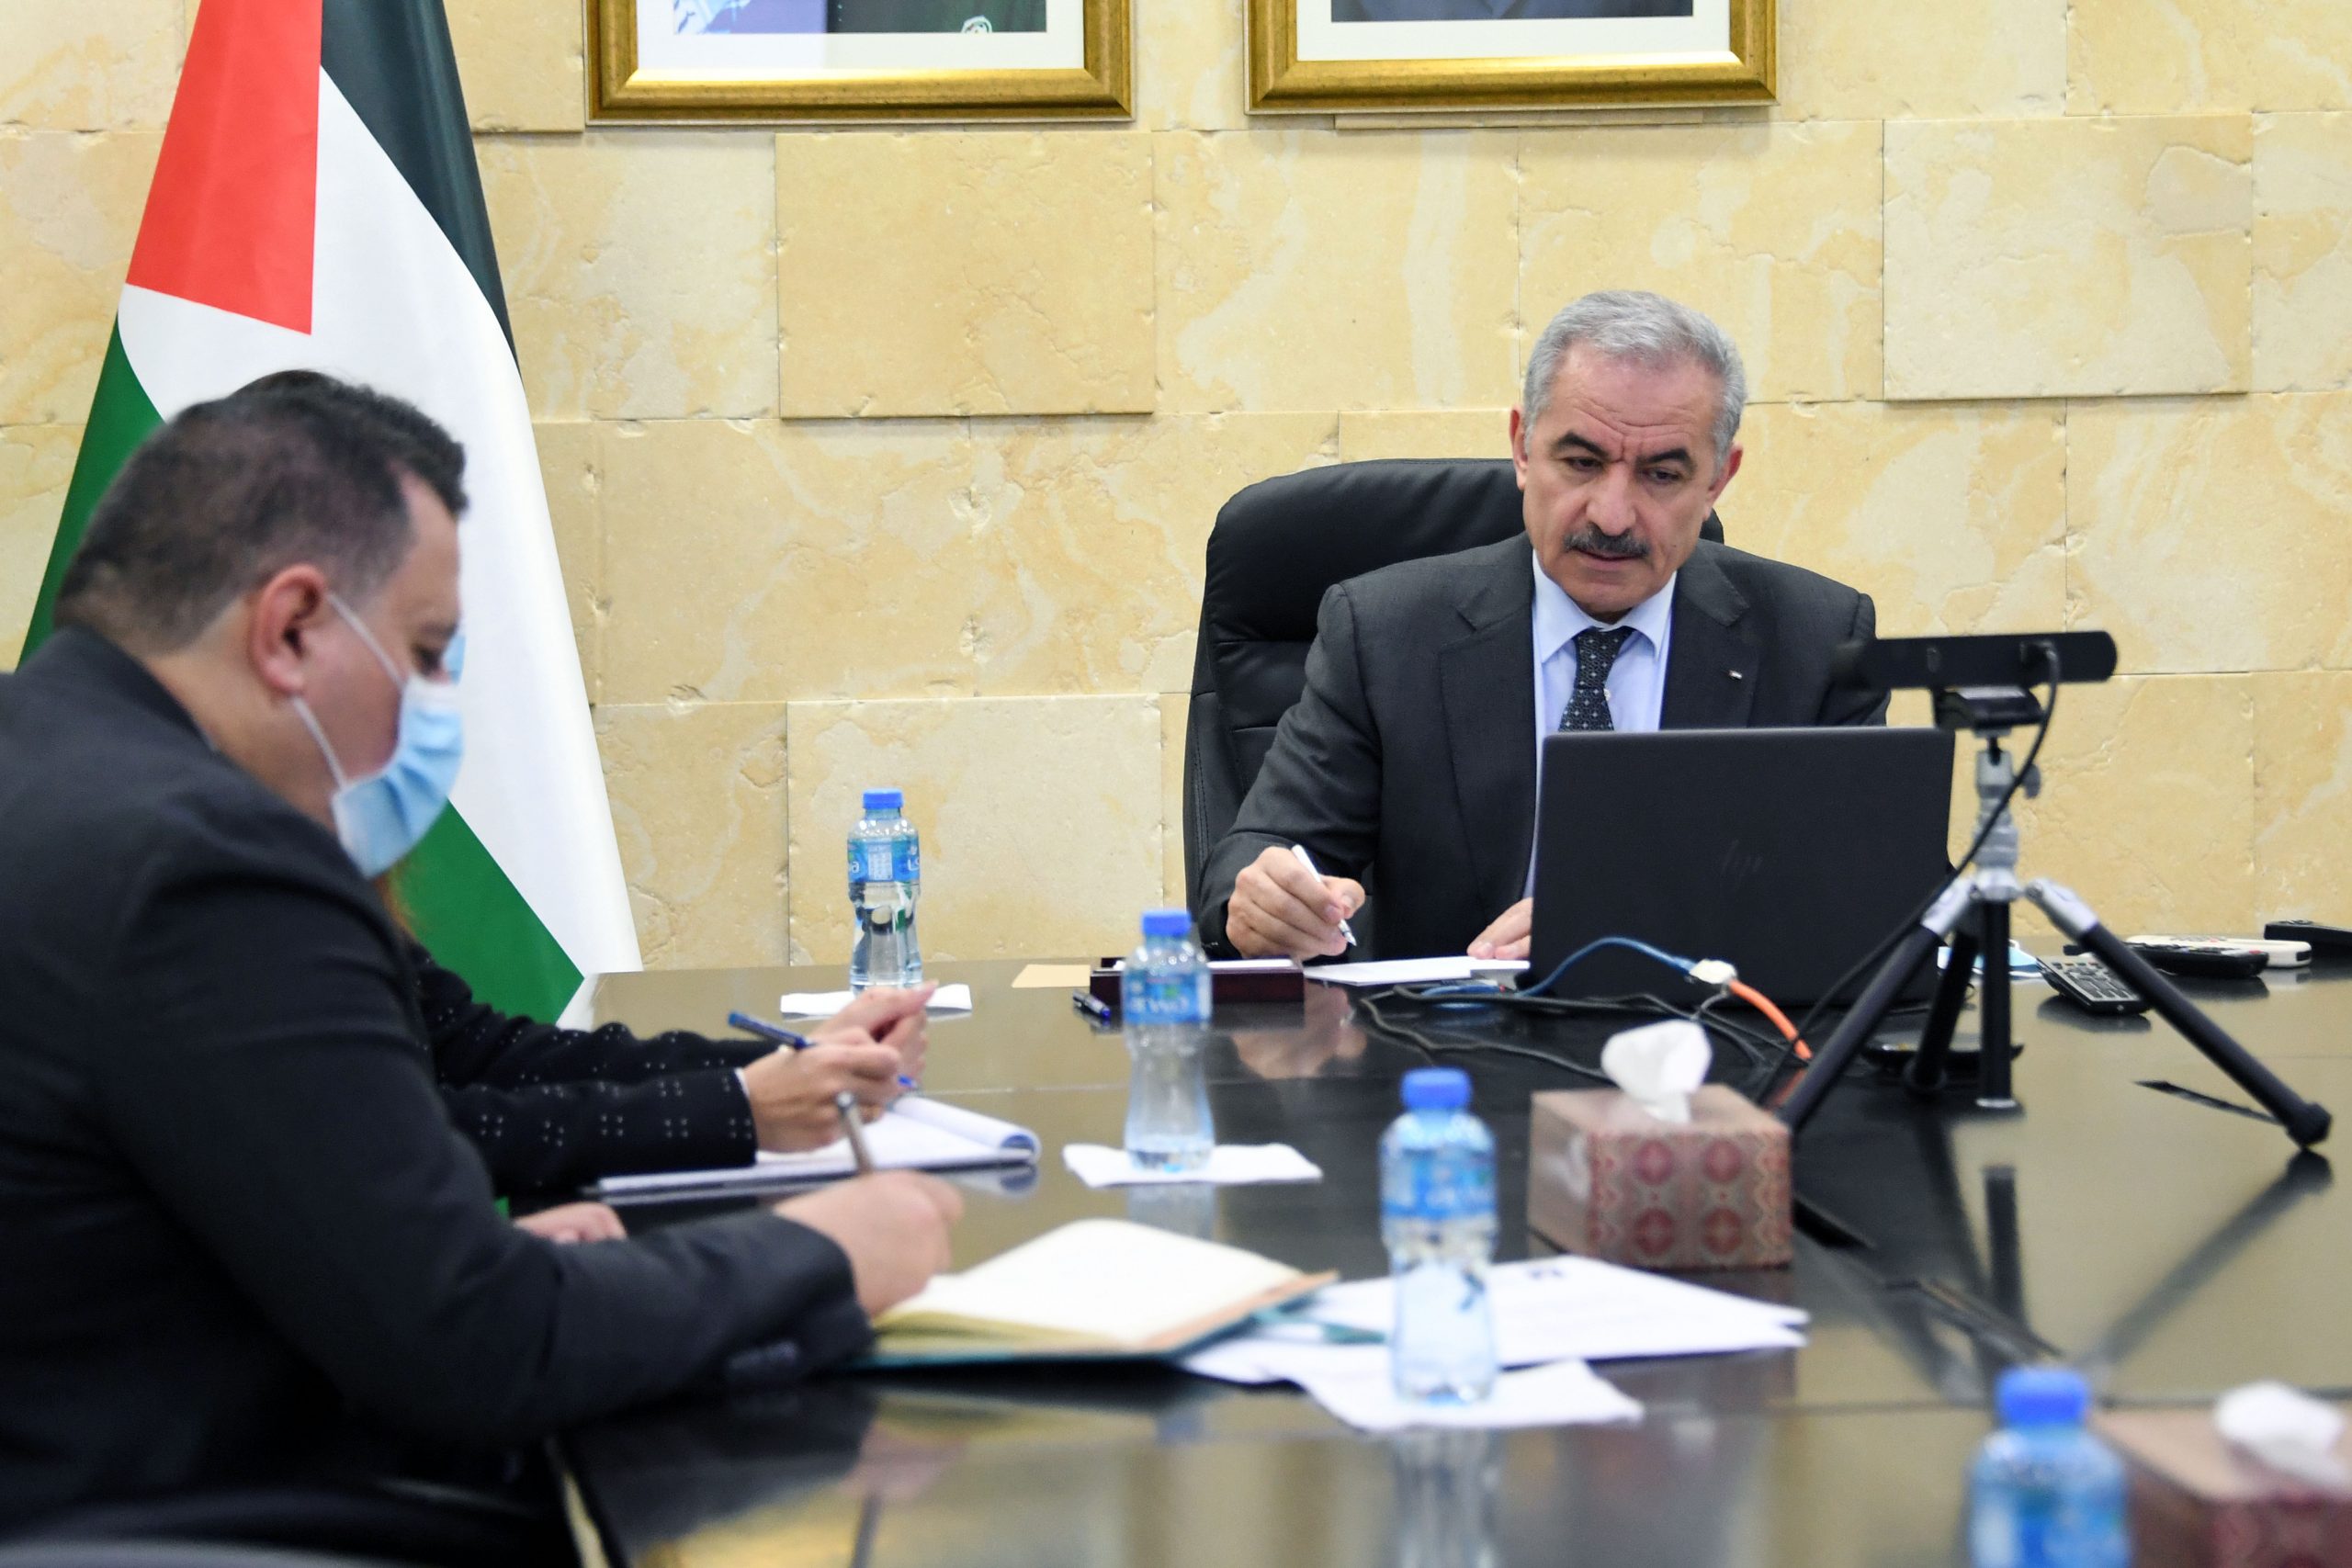 Prime Minister Shtayyeh discusses the latest political developments with a German official